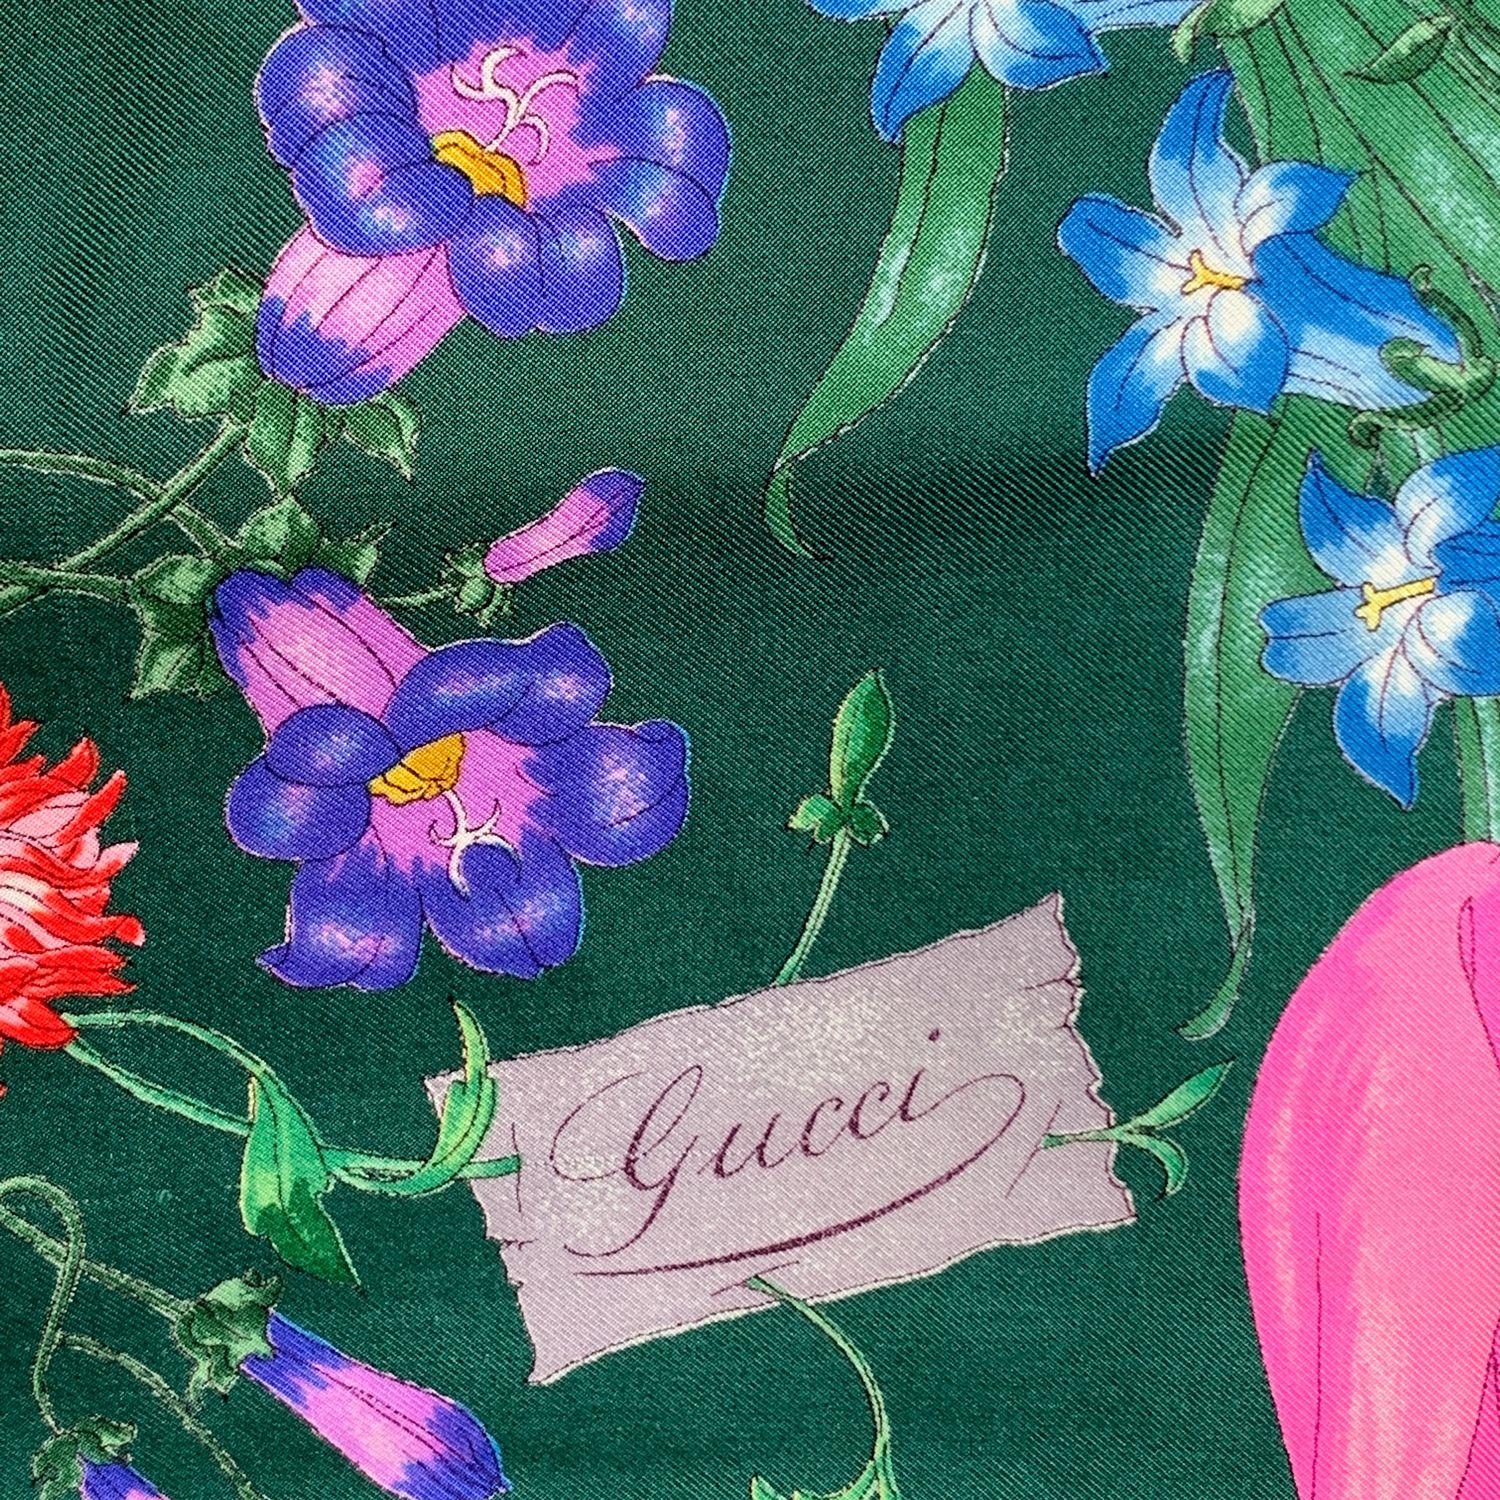 The Flora silk scarf born in 1966 by the scenographer Vittorio Accornero. He was the textile disegner for Gucci between the 1960s and 1981. The Flora design is a magical and delicate composition of flowers, berries and insects depicted with the